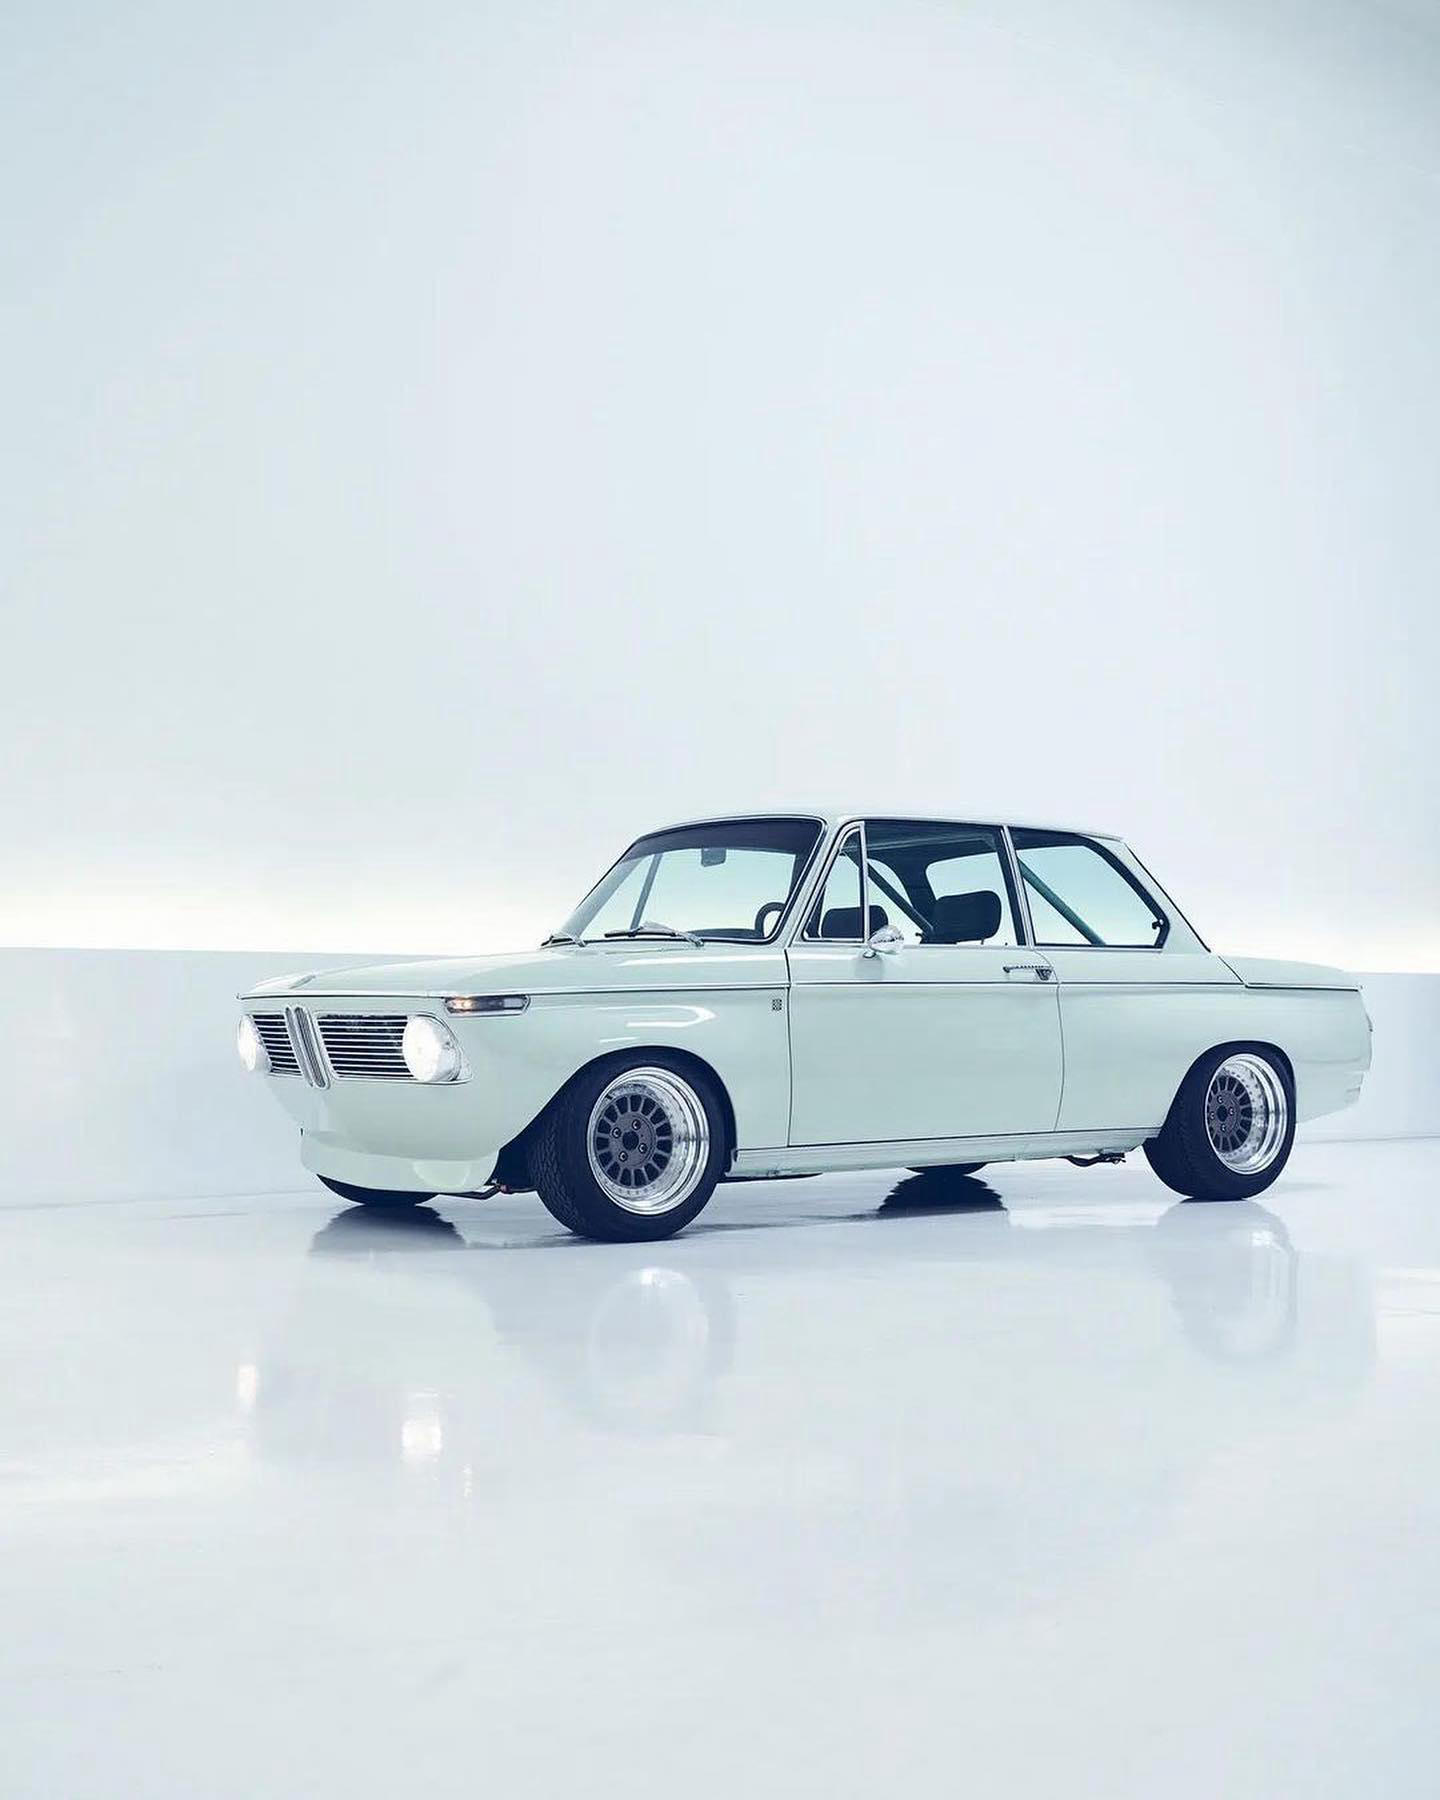 image  1 designboom magazine - the #SonofCobra BMW 2002 is a #carbonfiber image of perfection